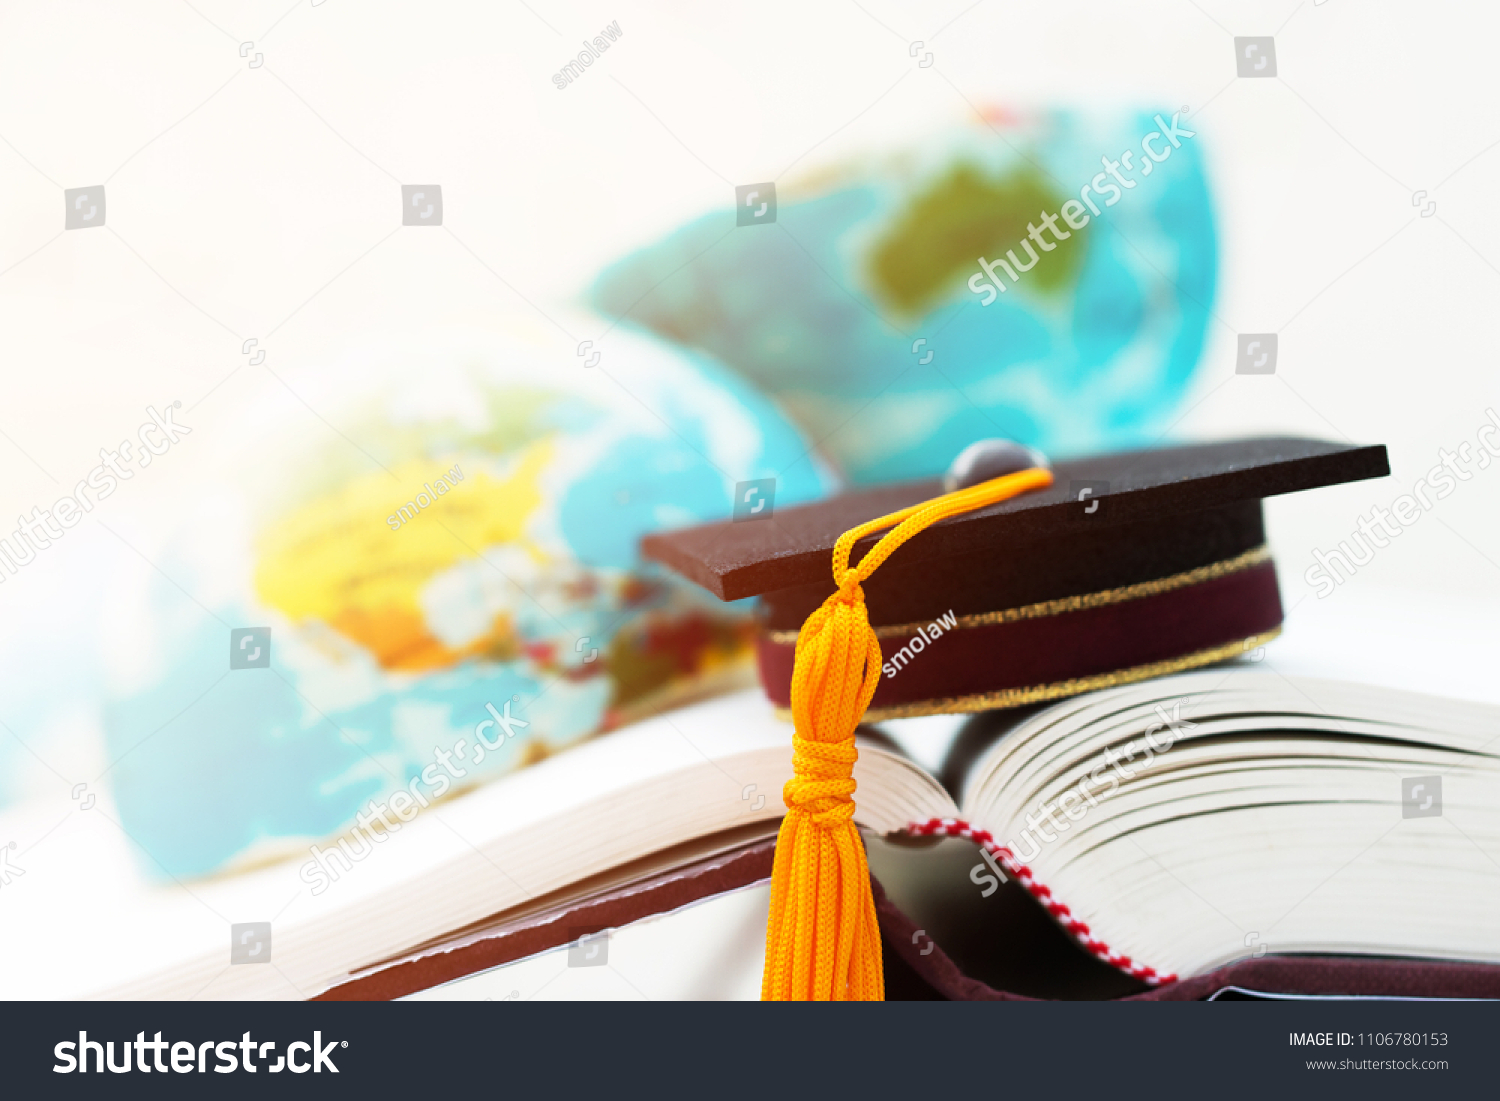 Graduate or Education knowledge learning study abroad concept : Graduation cap on opening textbook with blur of america australia earth world globe model map in Library room of campus, Back to School  #1106780153